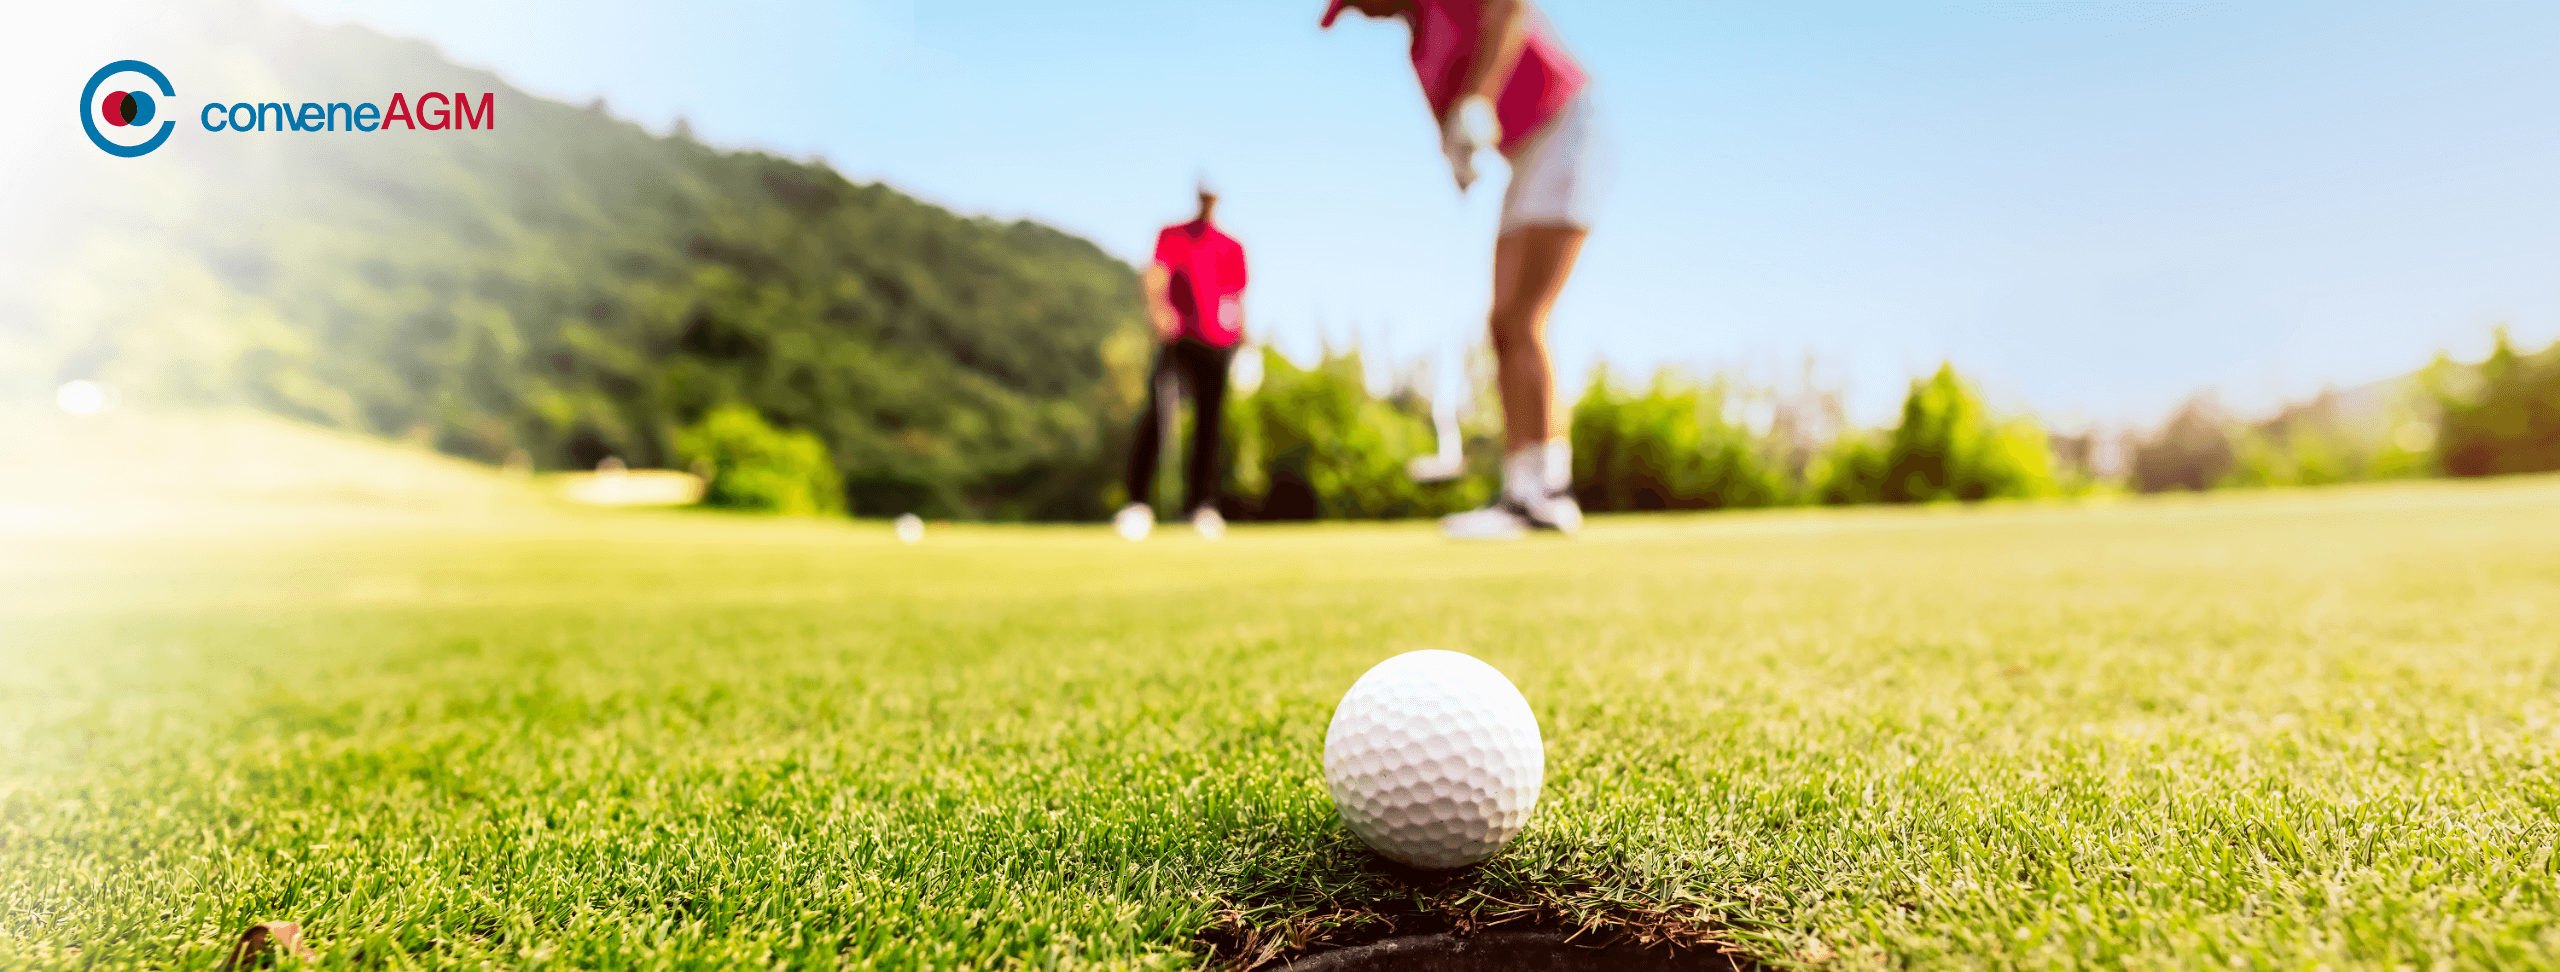 Seletar Country Club Switches to ConveneAGM Due to Its Superior Functionalities